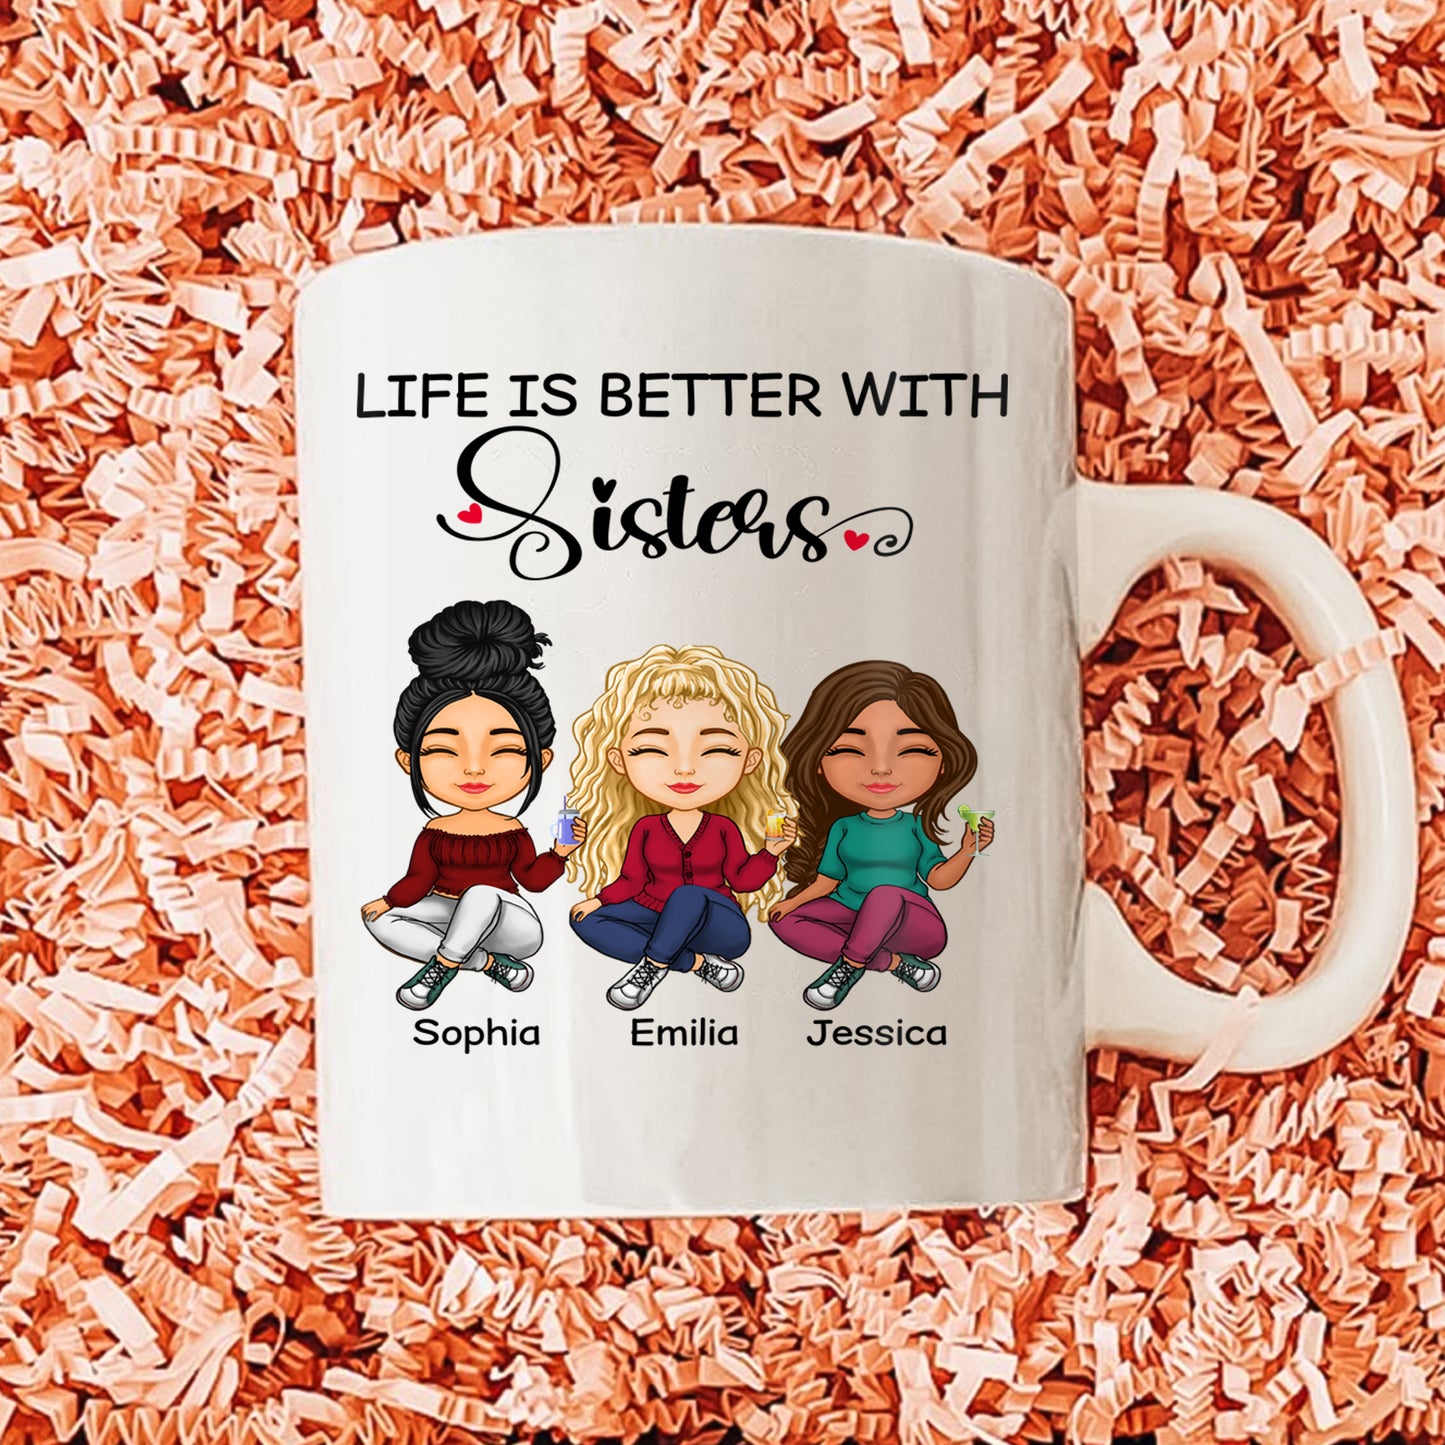 Besties - Life Is Better With Sisters - Personalized Mug (Ver 3)